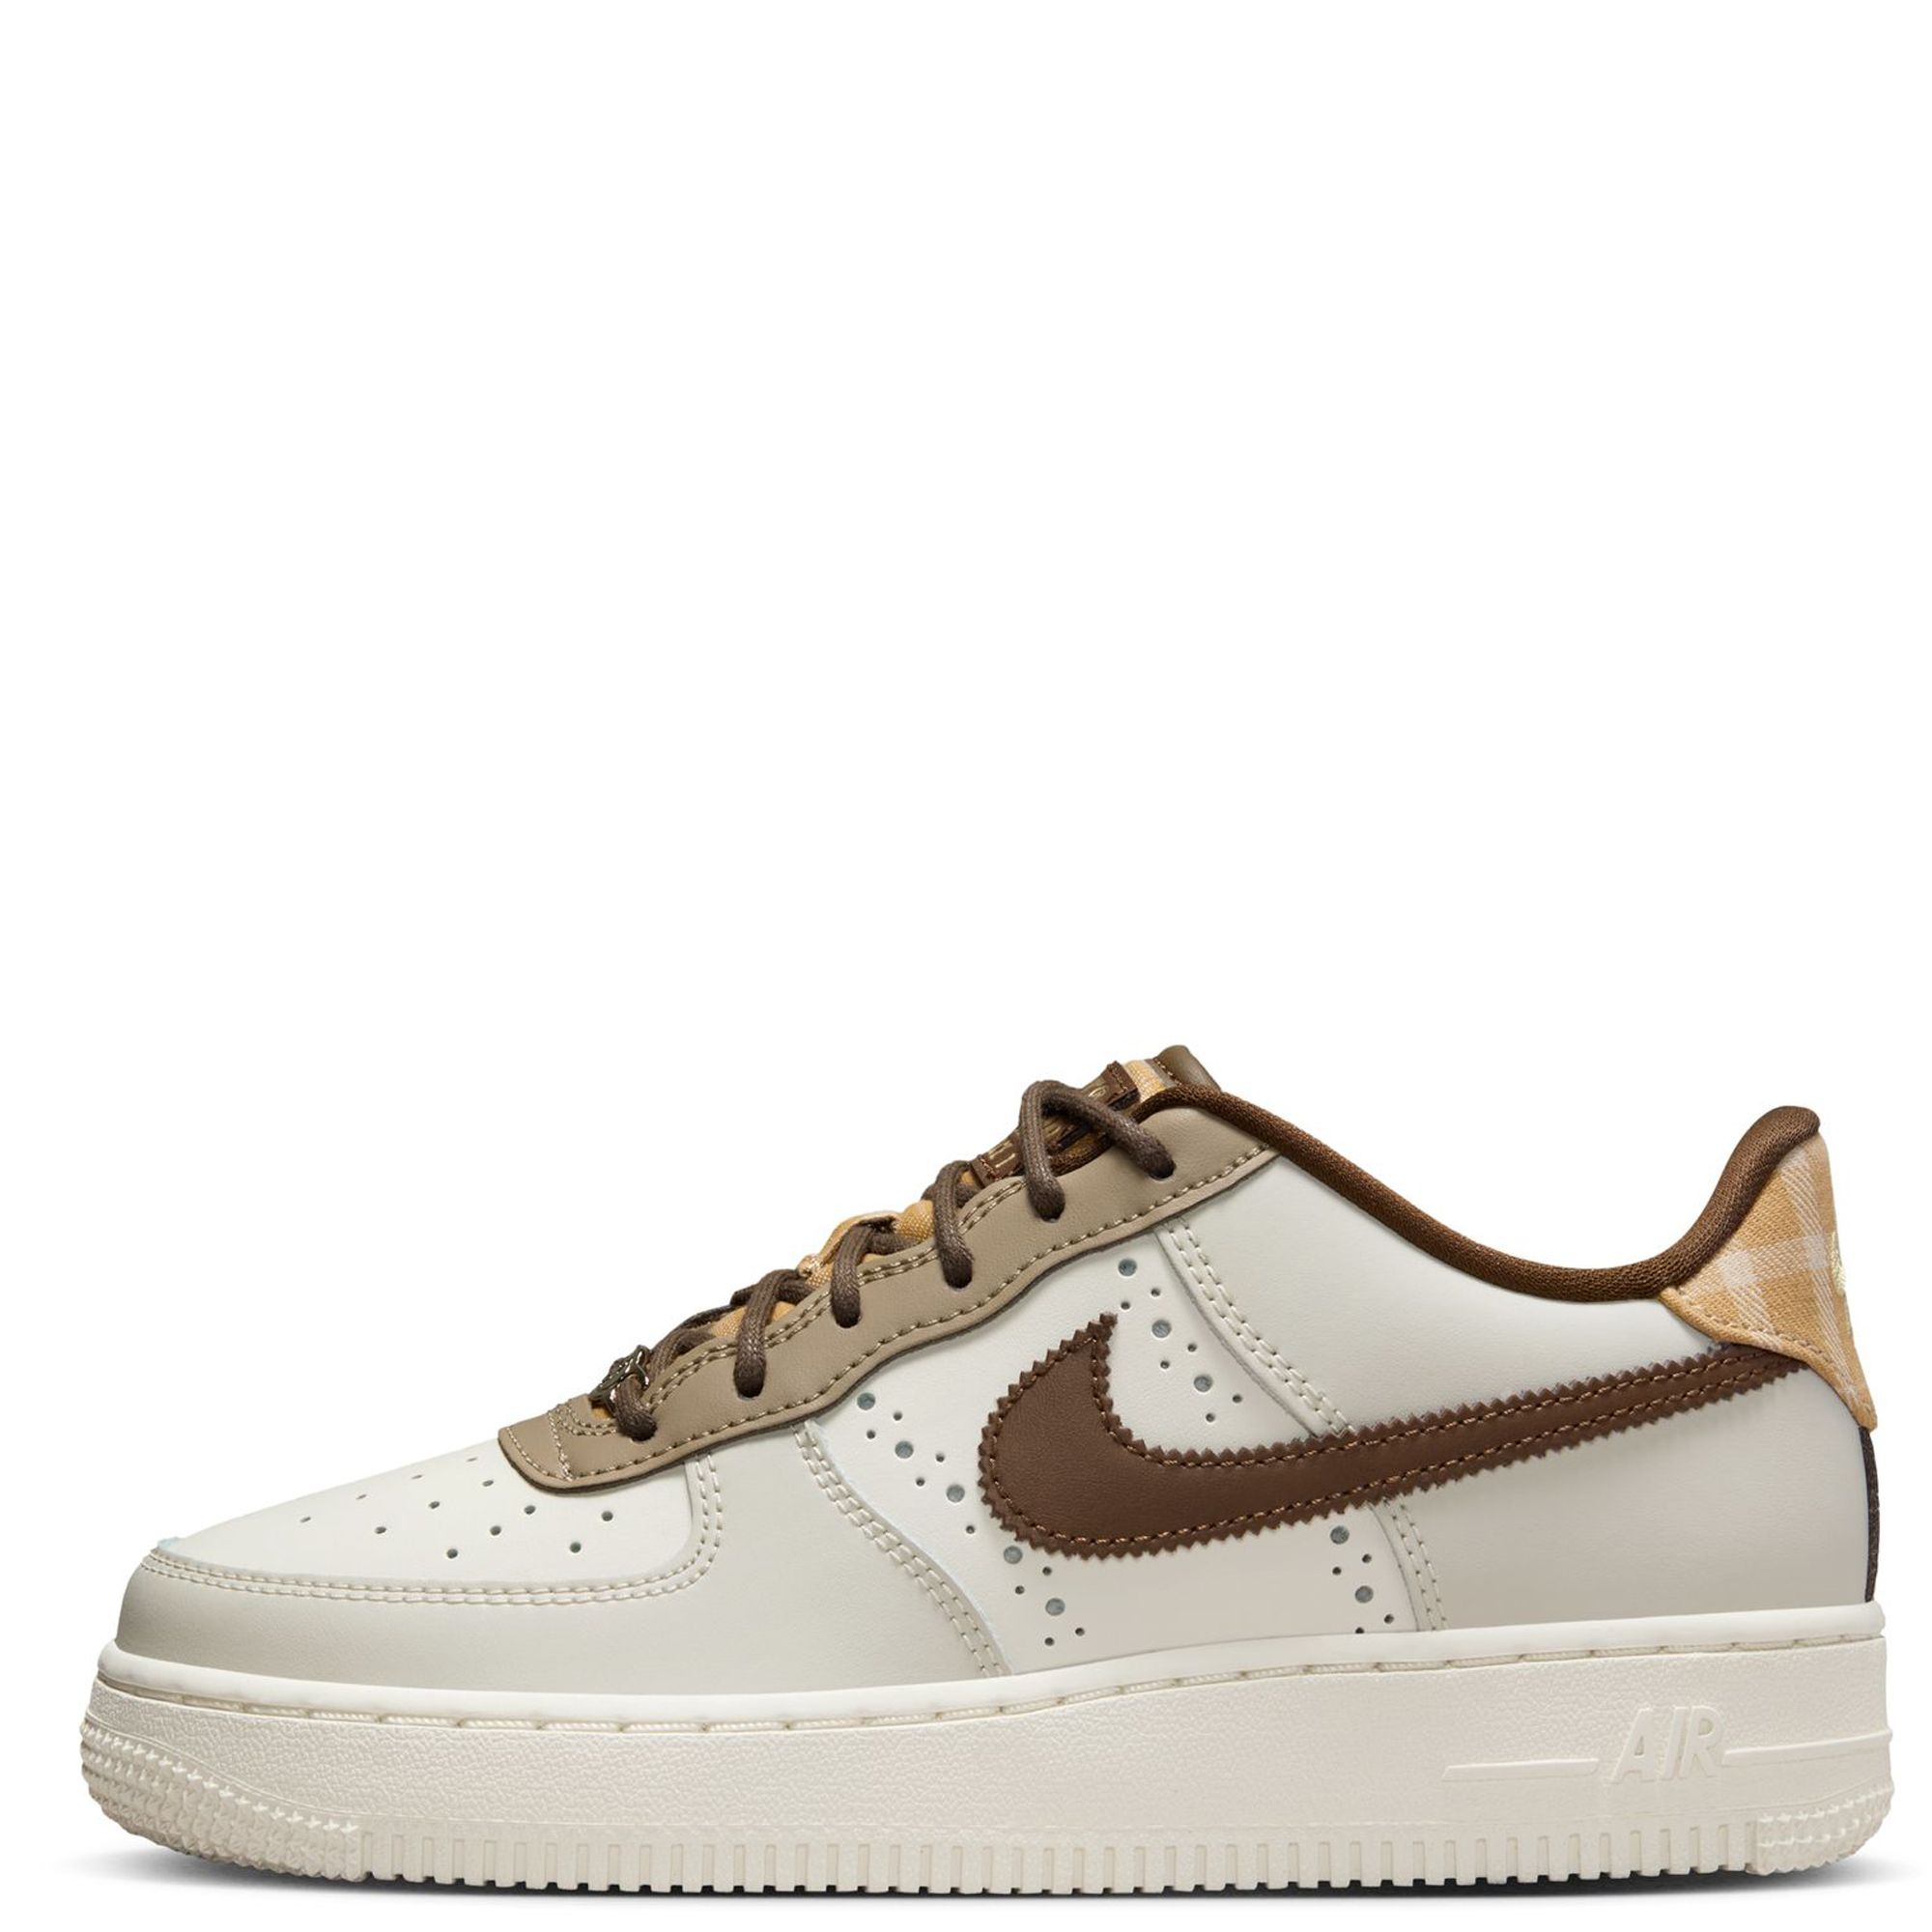 Nike Air Force 1 LV8 3 Wheat Toddler Kid's Shoes 2.5 year